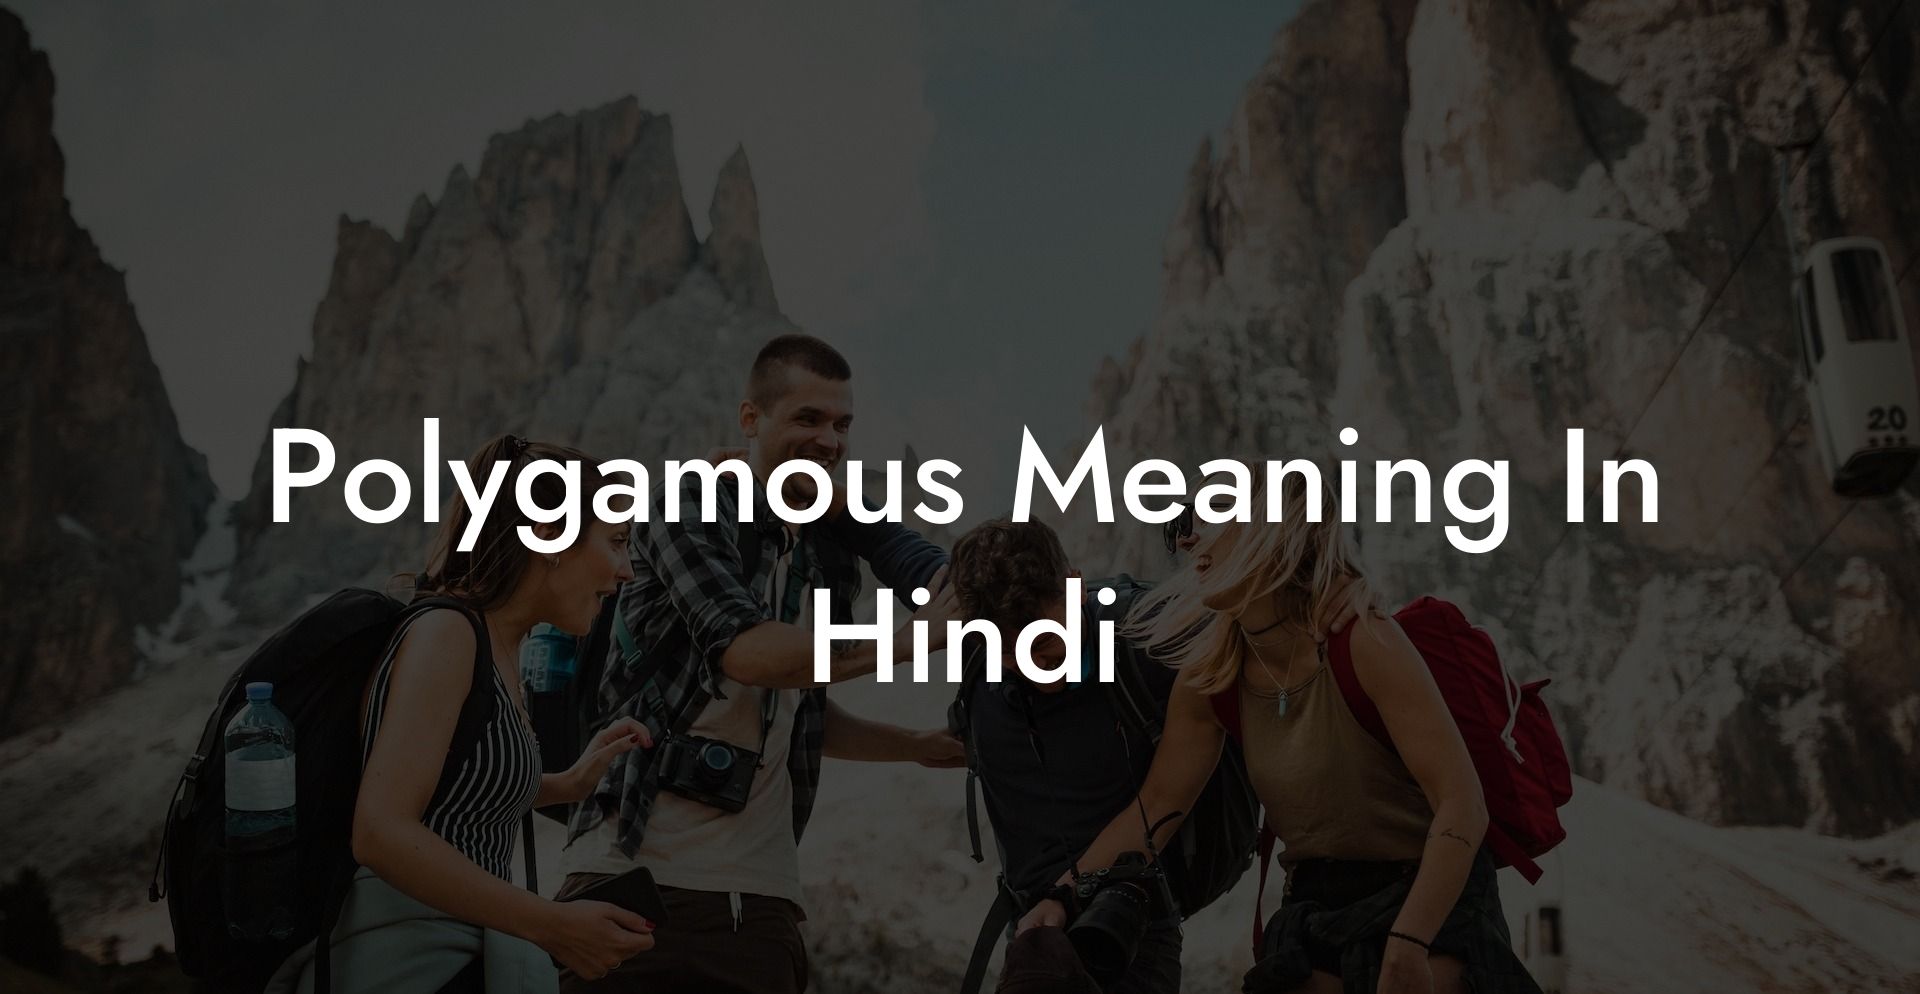 Polygamous Meaning In Hindi